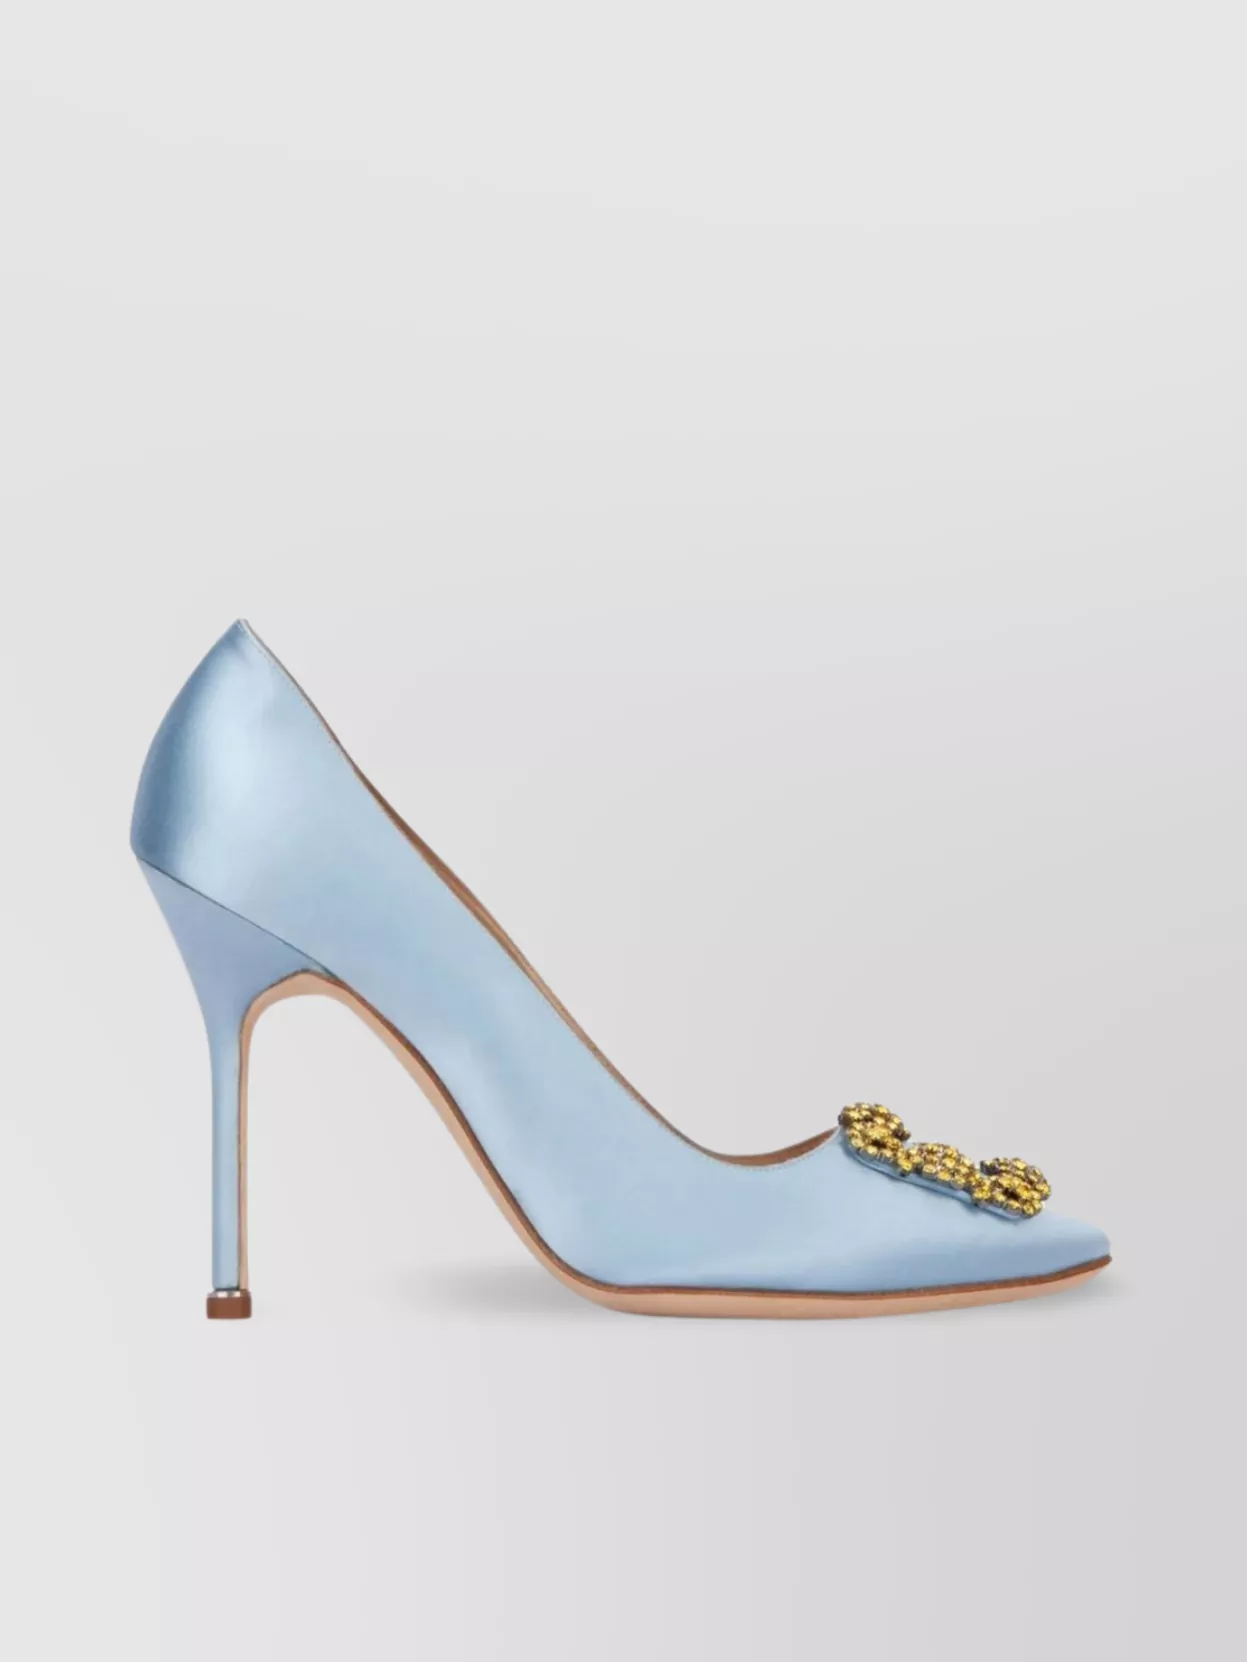 Shop Manolo Blahnik Satin Hangisi 105 Pumps With Pointed Toe And Stiletto Heel In Pastel